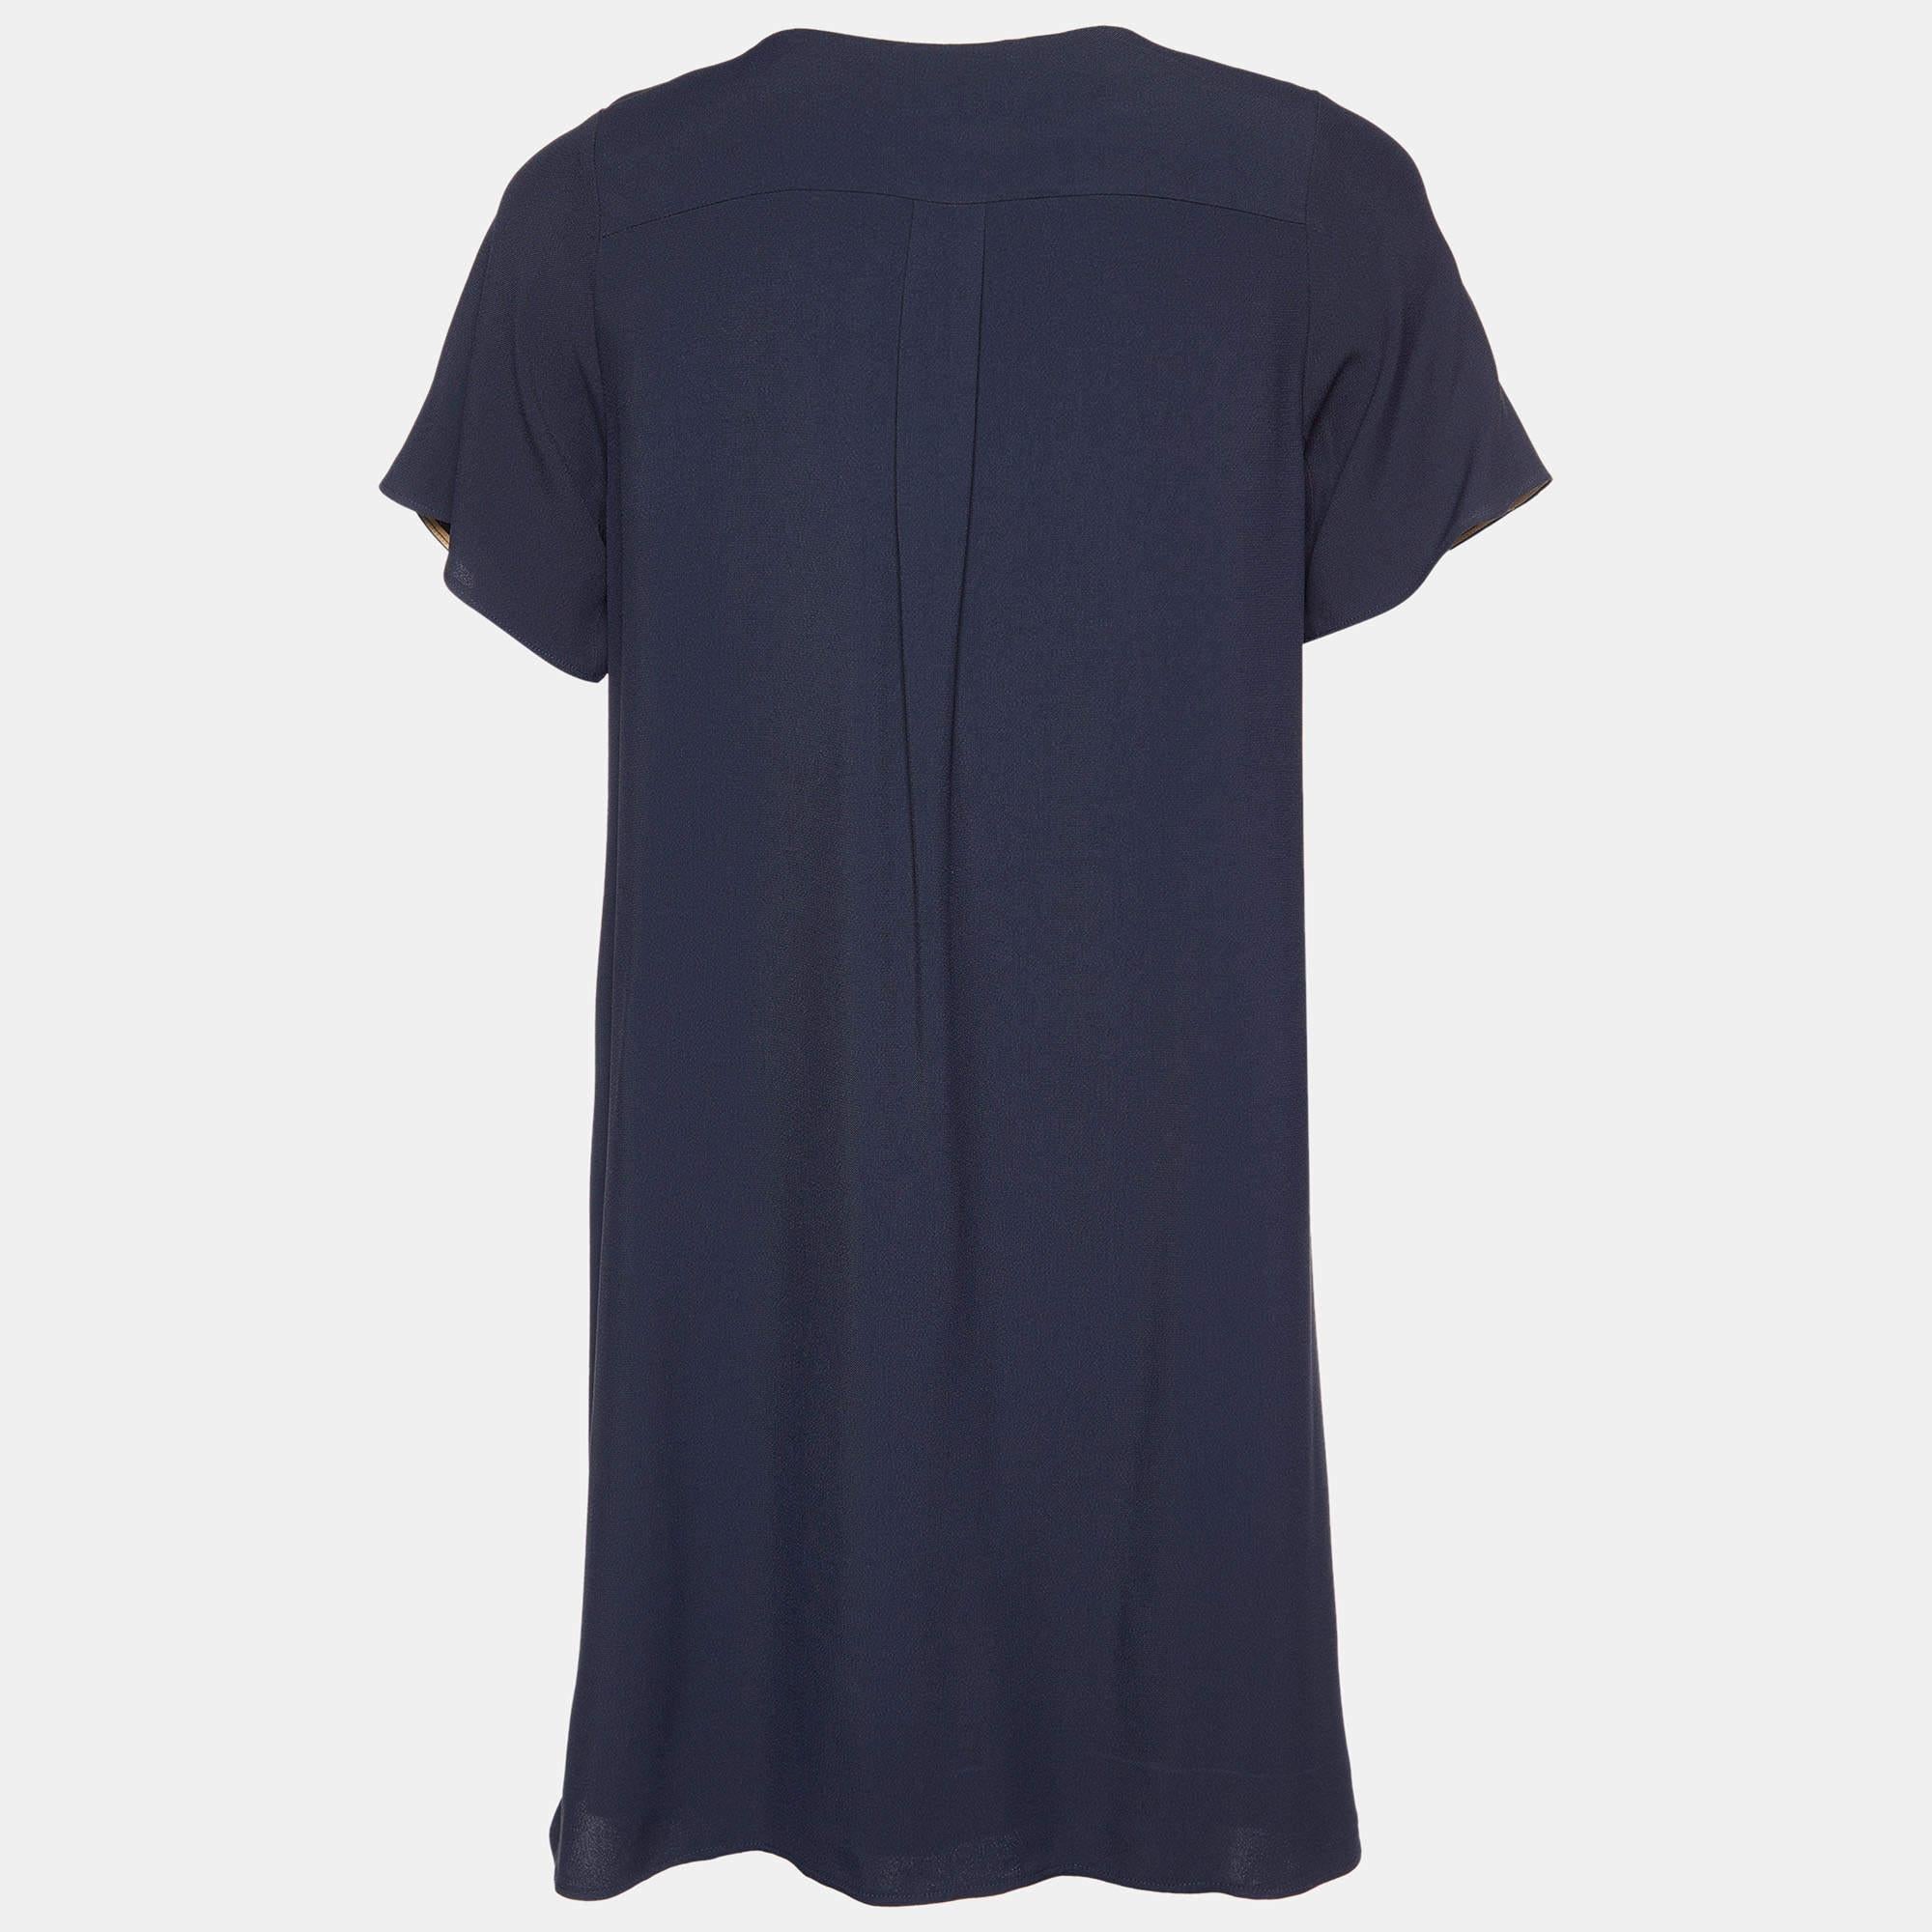 This dress designed by Chloé is here to a dash of panache to your ensemble. It is stitched using comfortable, good-quality fabric and flaunts an attractive silhouette.

